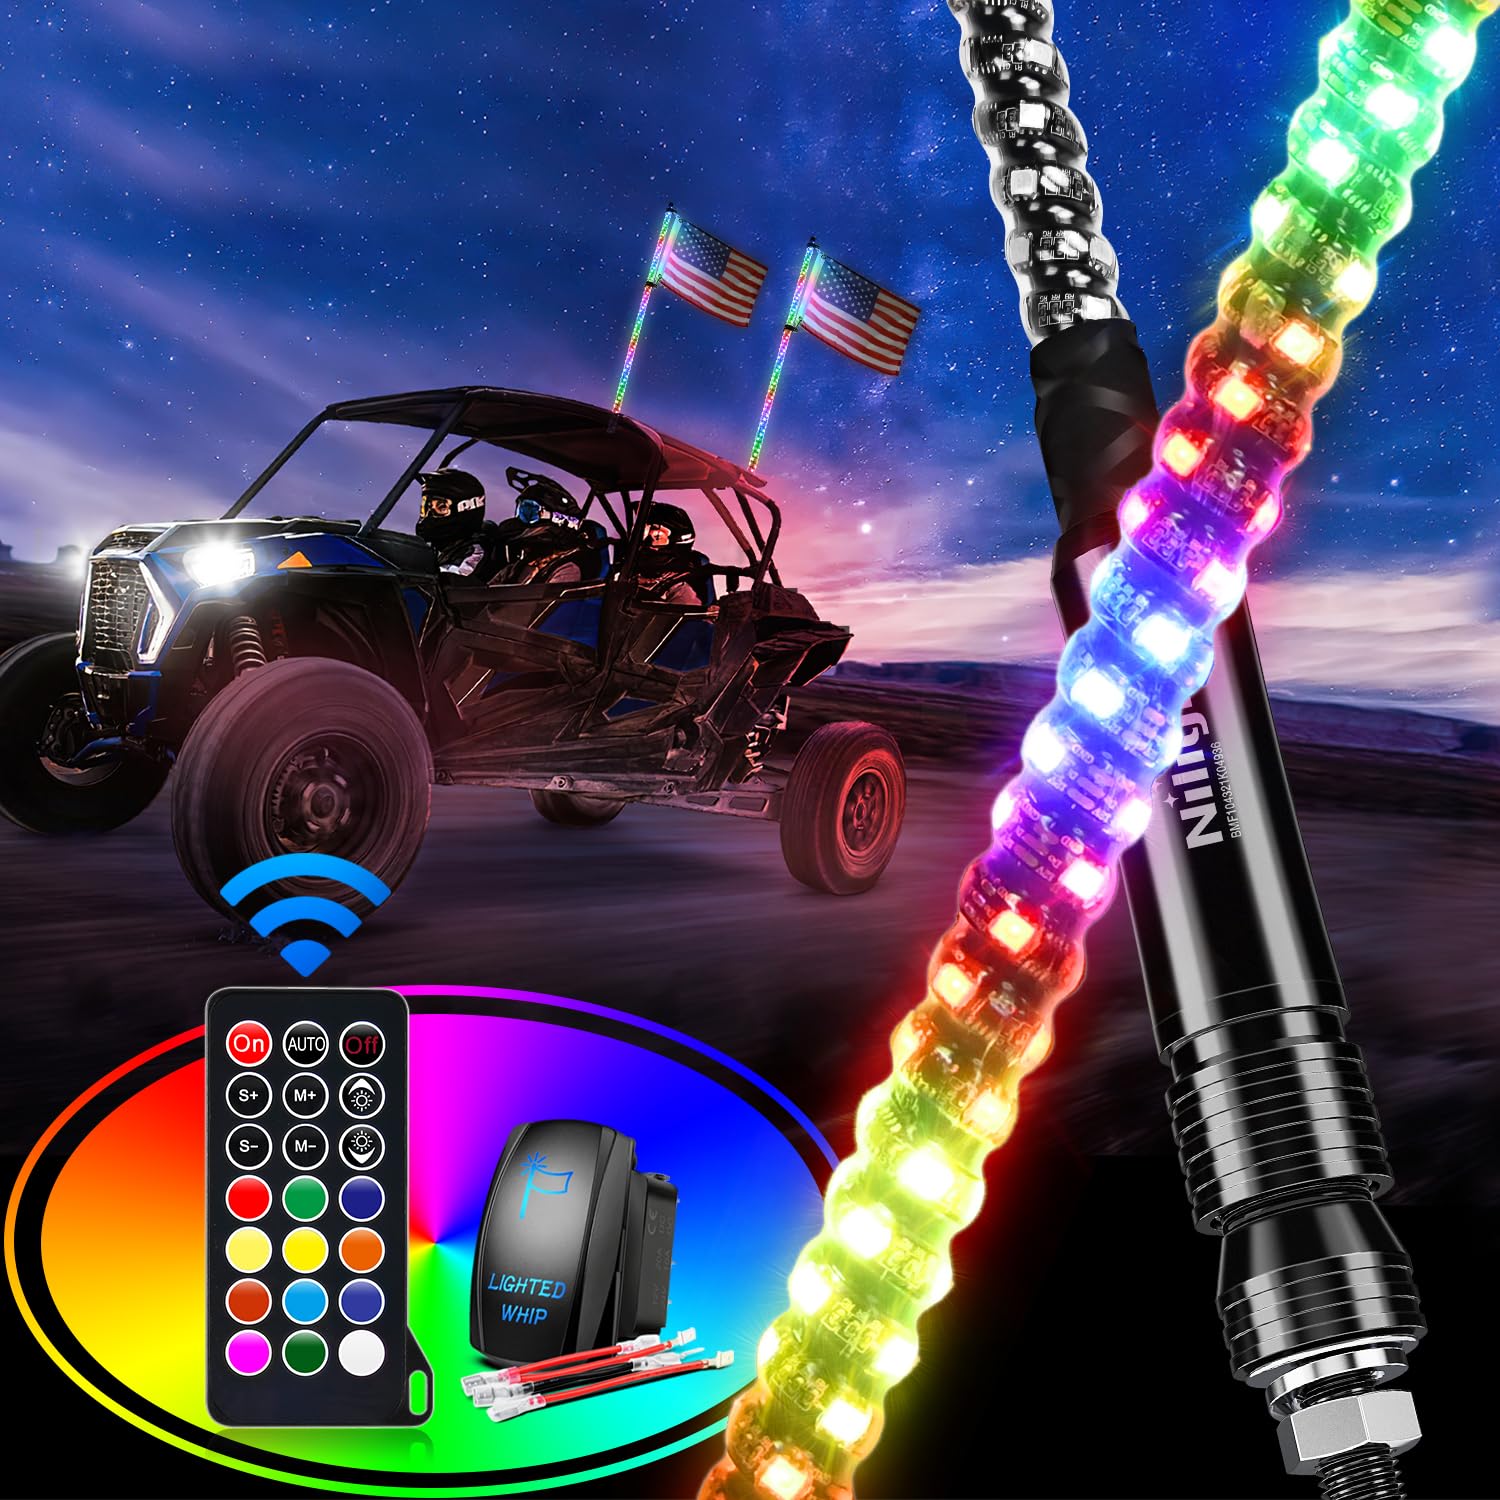 Nilight 2PCS 2FT Spiral RGB Led Whip Light w/RGB Chasing/Dancing Light RF Remote Control Lighted Antenna Whips for Can-am ATV UTV RZR Polaris Dune Buggy 4-Wheeler Offroad Truck, 2 Year Warranty